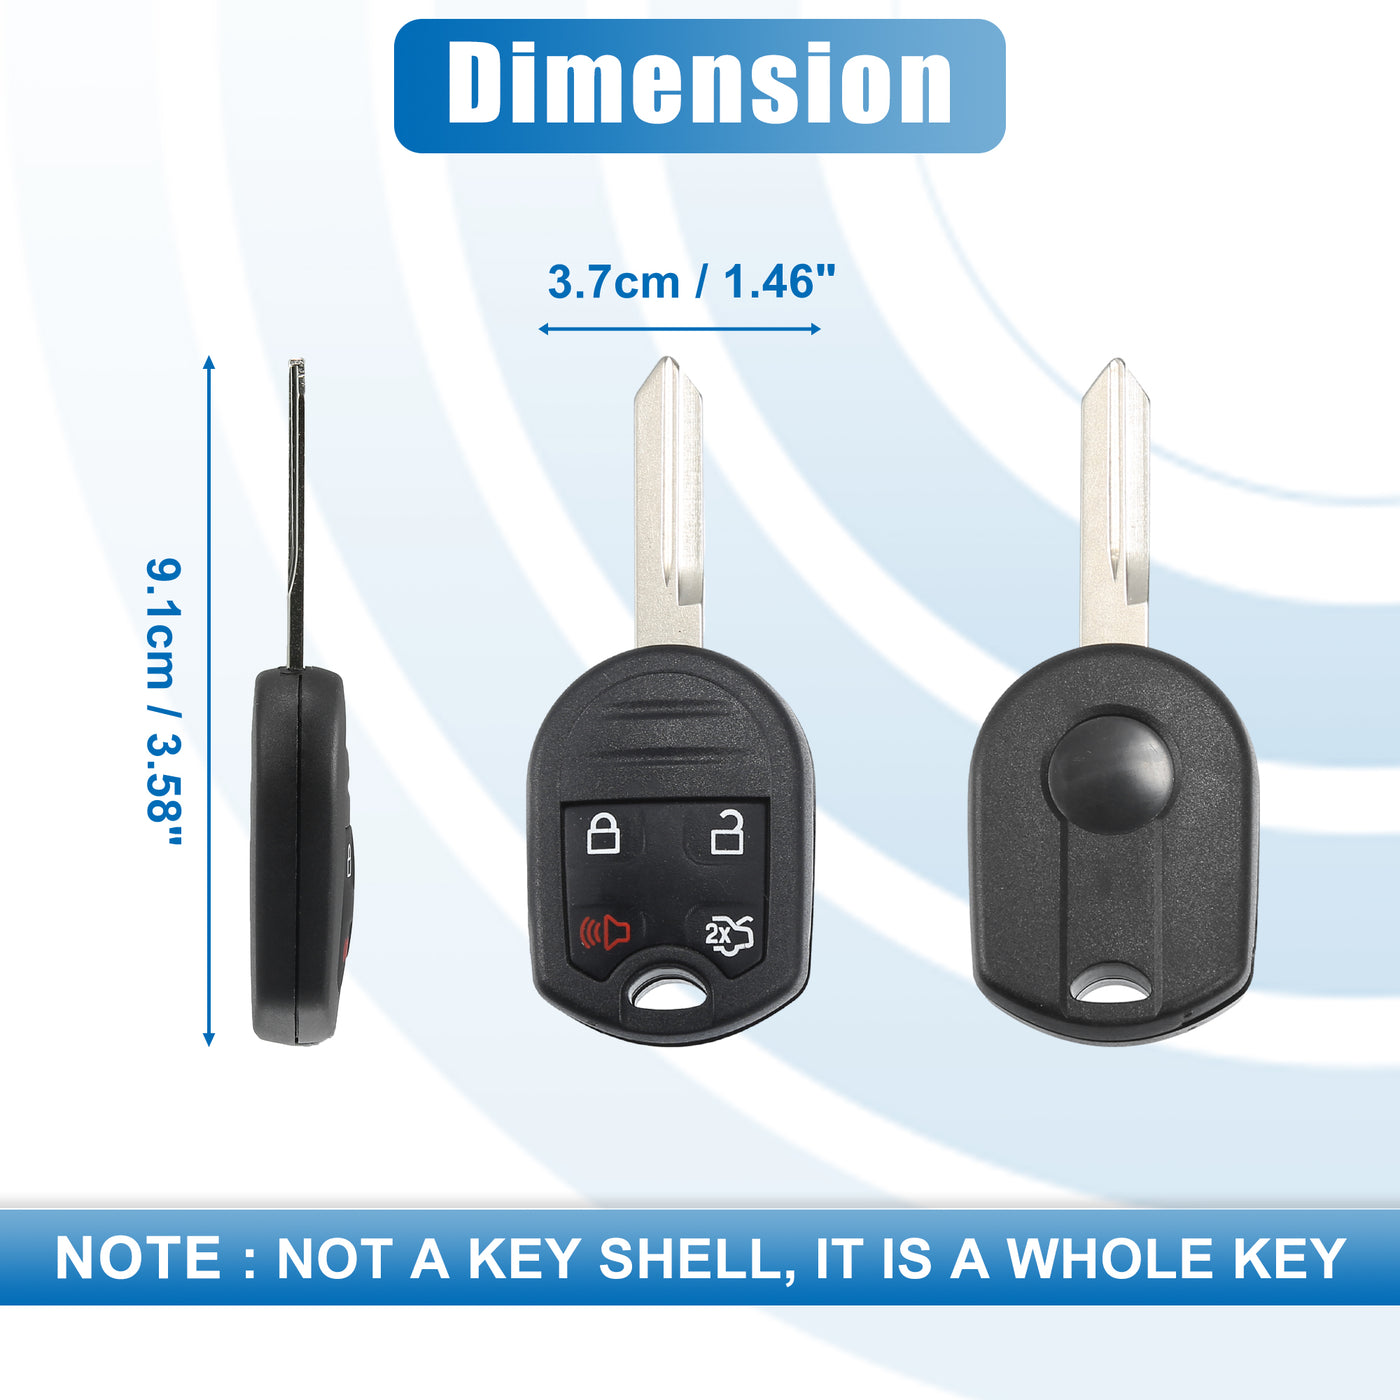 uxcell Uxcell 2 Pcs Replacement Keyless Entry Remote Car Key Fob CWTWB1U793 315MHz for Ford Explorer 2001-2015 for Mustang Expedition Edge Focus Taurus Escape Fusion for Lincoln Navigator